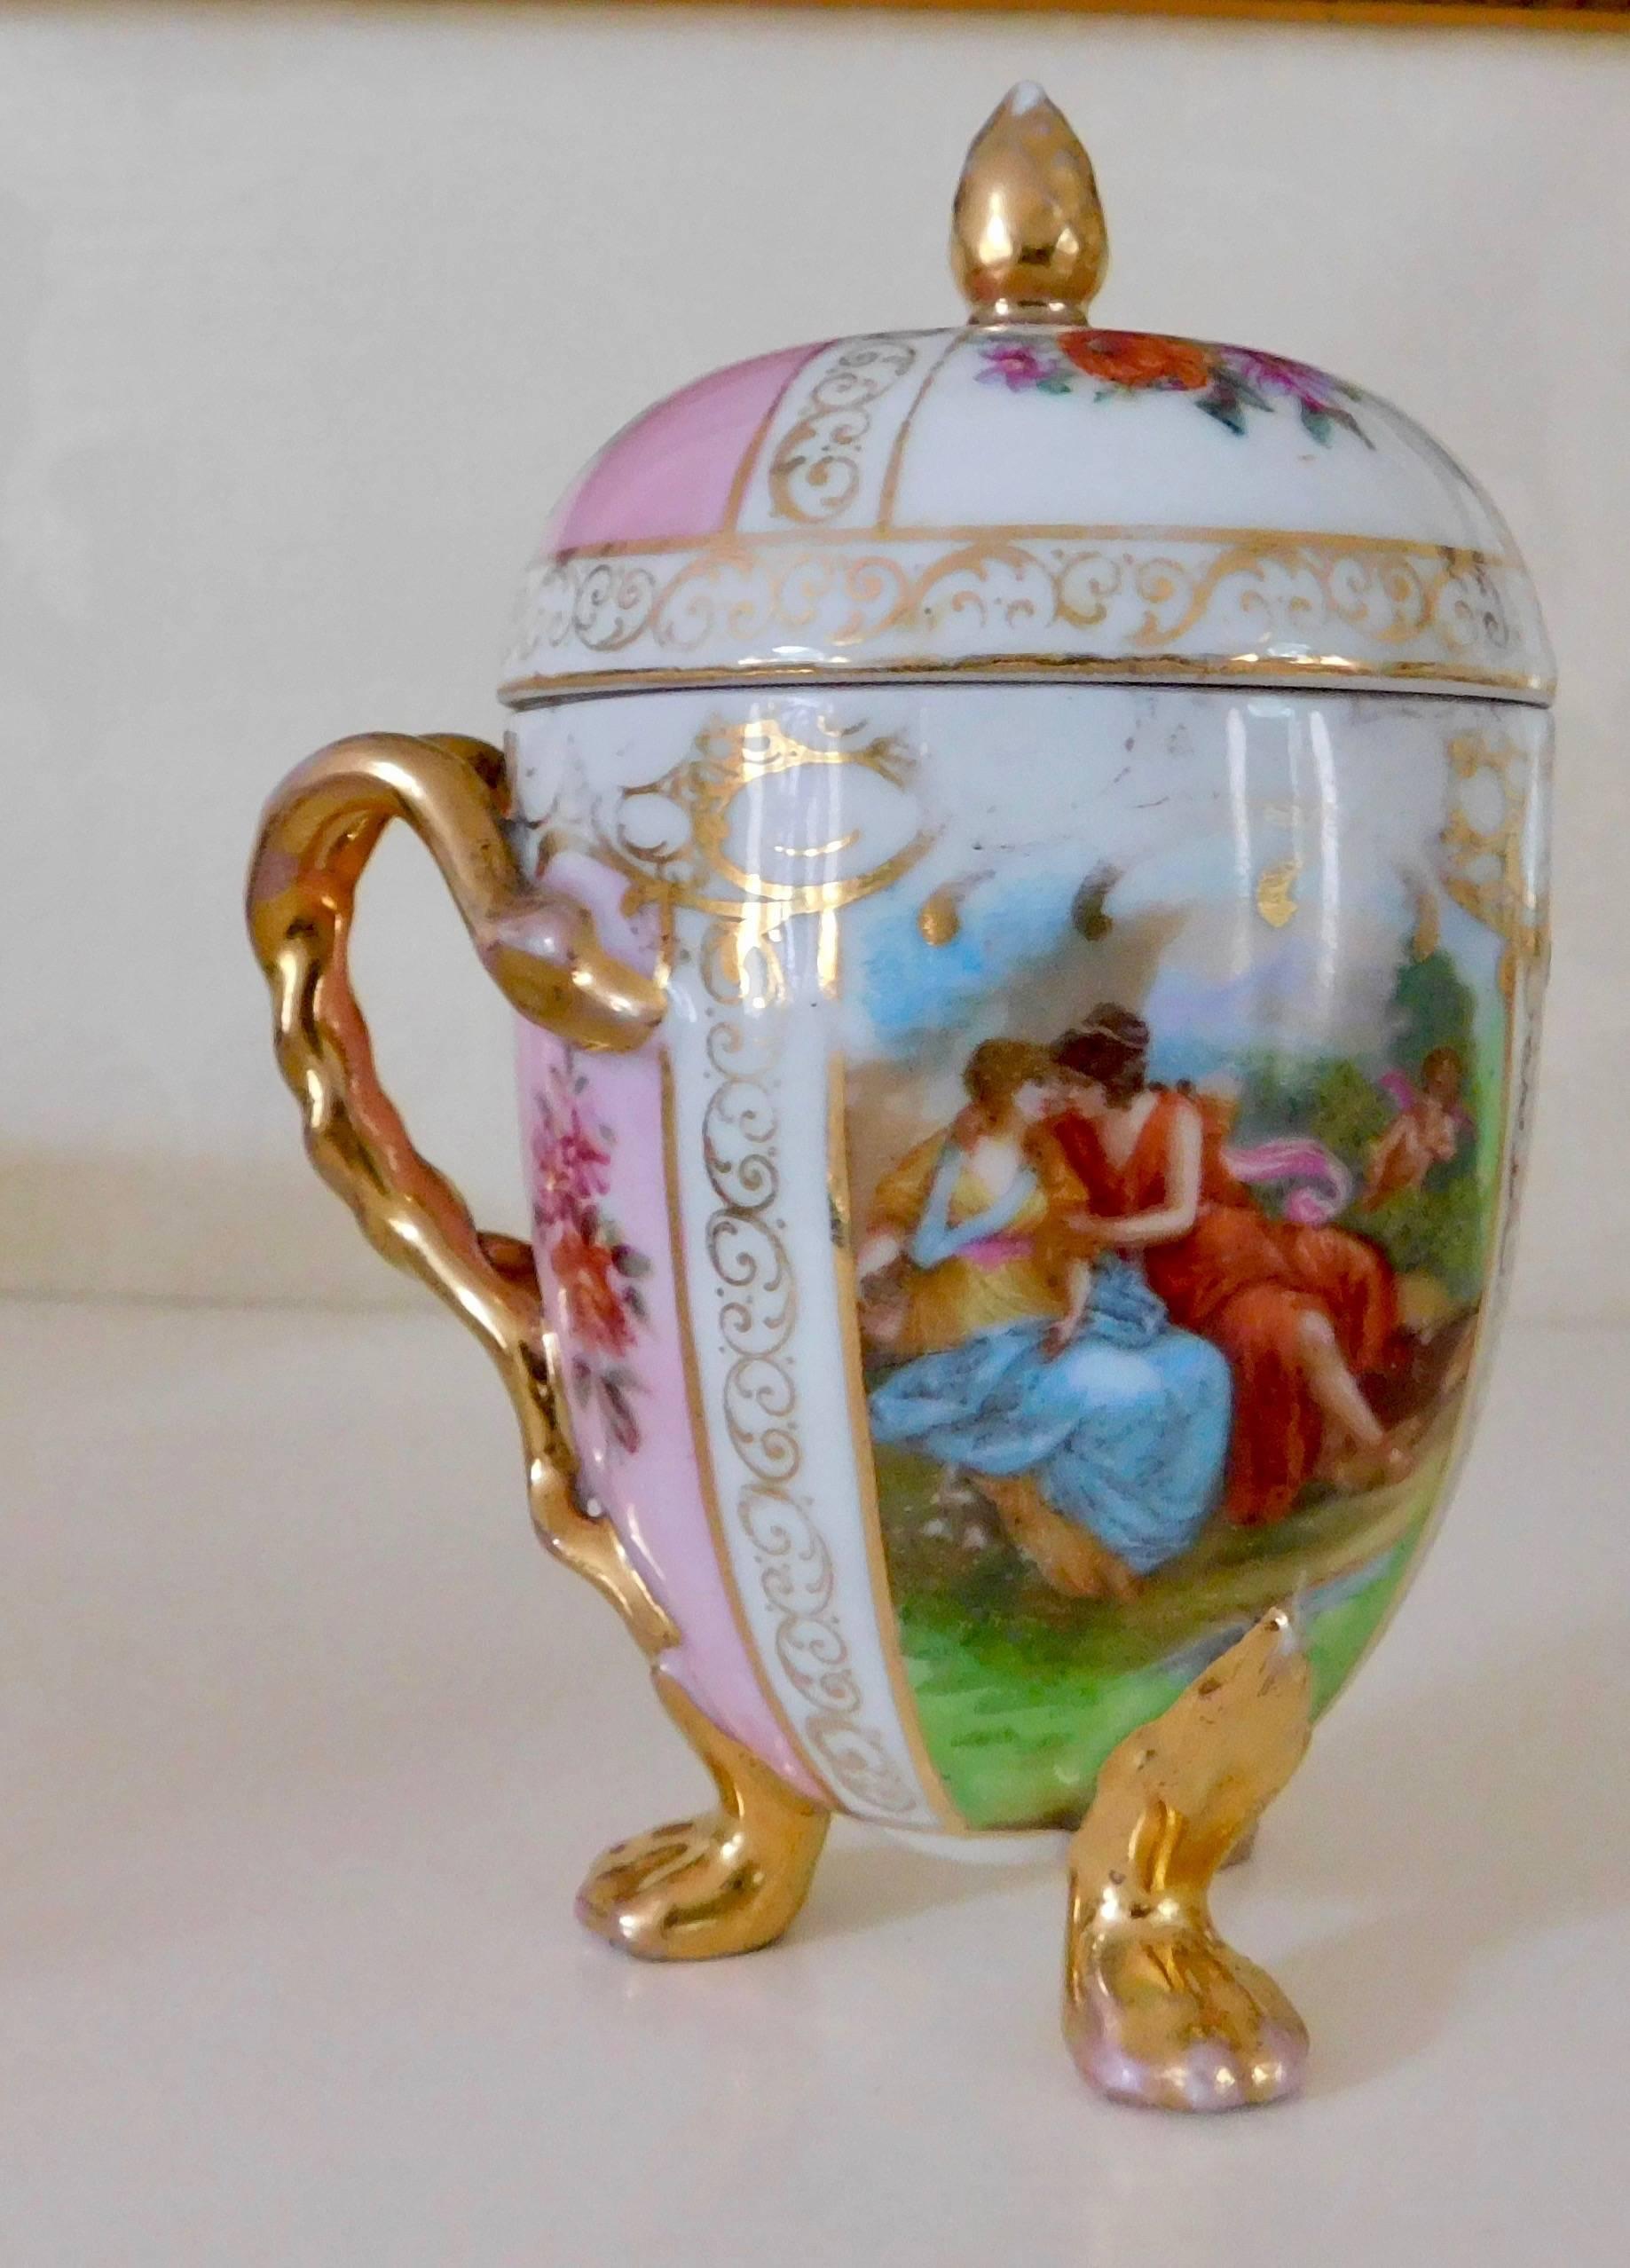 Antique 19th Century Meissen Porcelain Tea Cup and Saucer with Lid Painted with scenes and gold. 3 pieces (cup, saucer & lid)
Cup 4.88 In H x 3.25 zin W x 3 In D
Saucer 5.5 In D x .88 In H


Meissen porcelain or Meissen china is the first